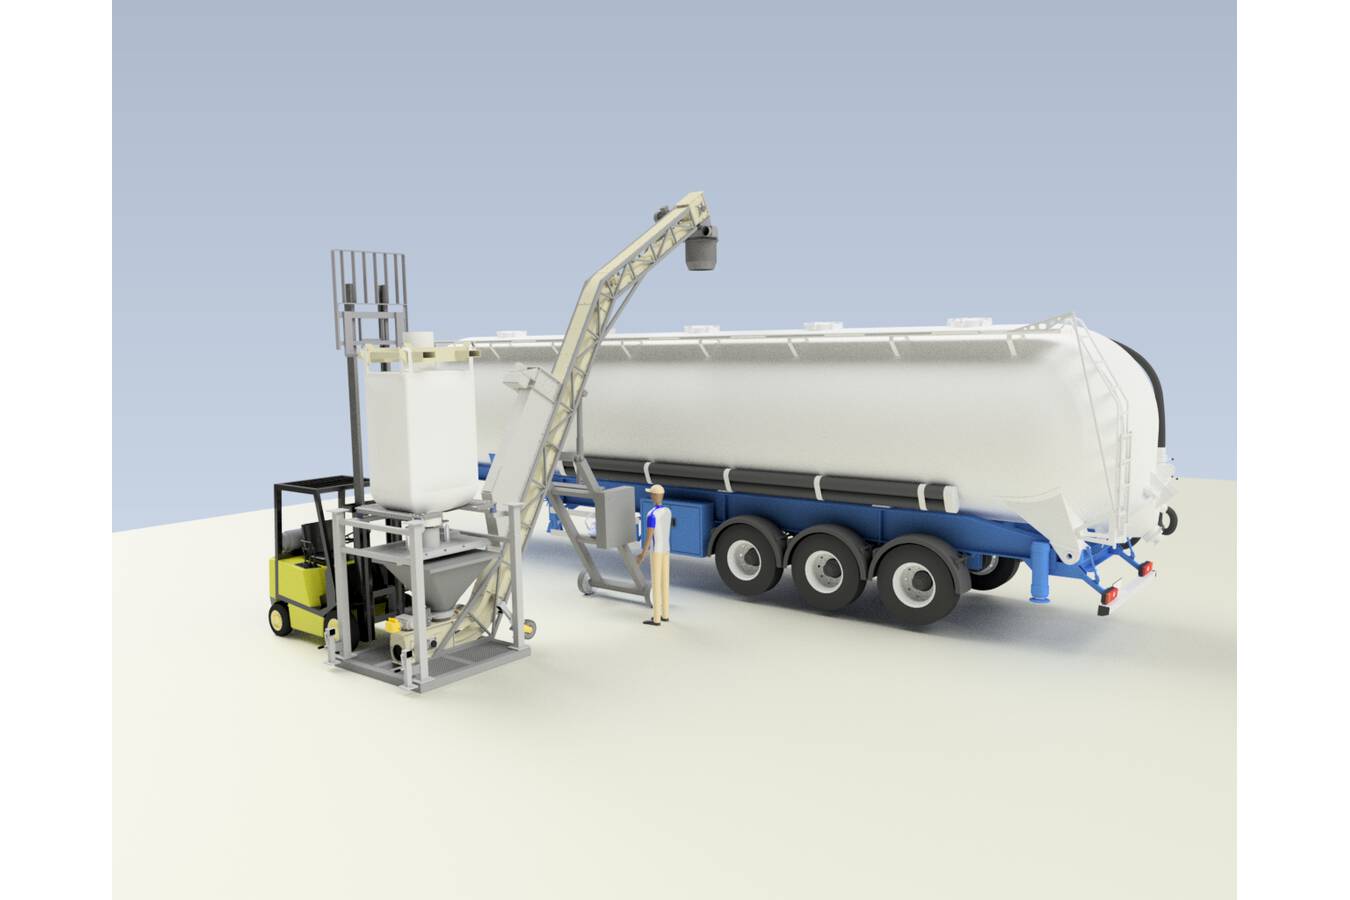  Poeth’s Z-Bulk Loader minimizes cross contamination The new Z-Bulkloader from Poeth enables dust-free unloading of big bags and sacks without unnecessary loss of raw material.